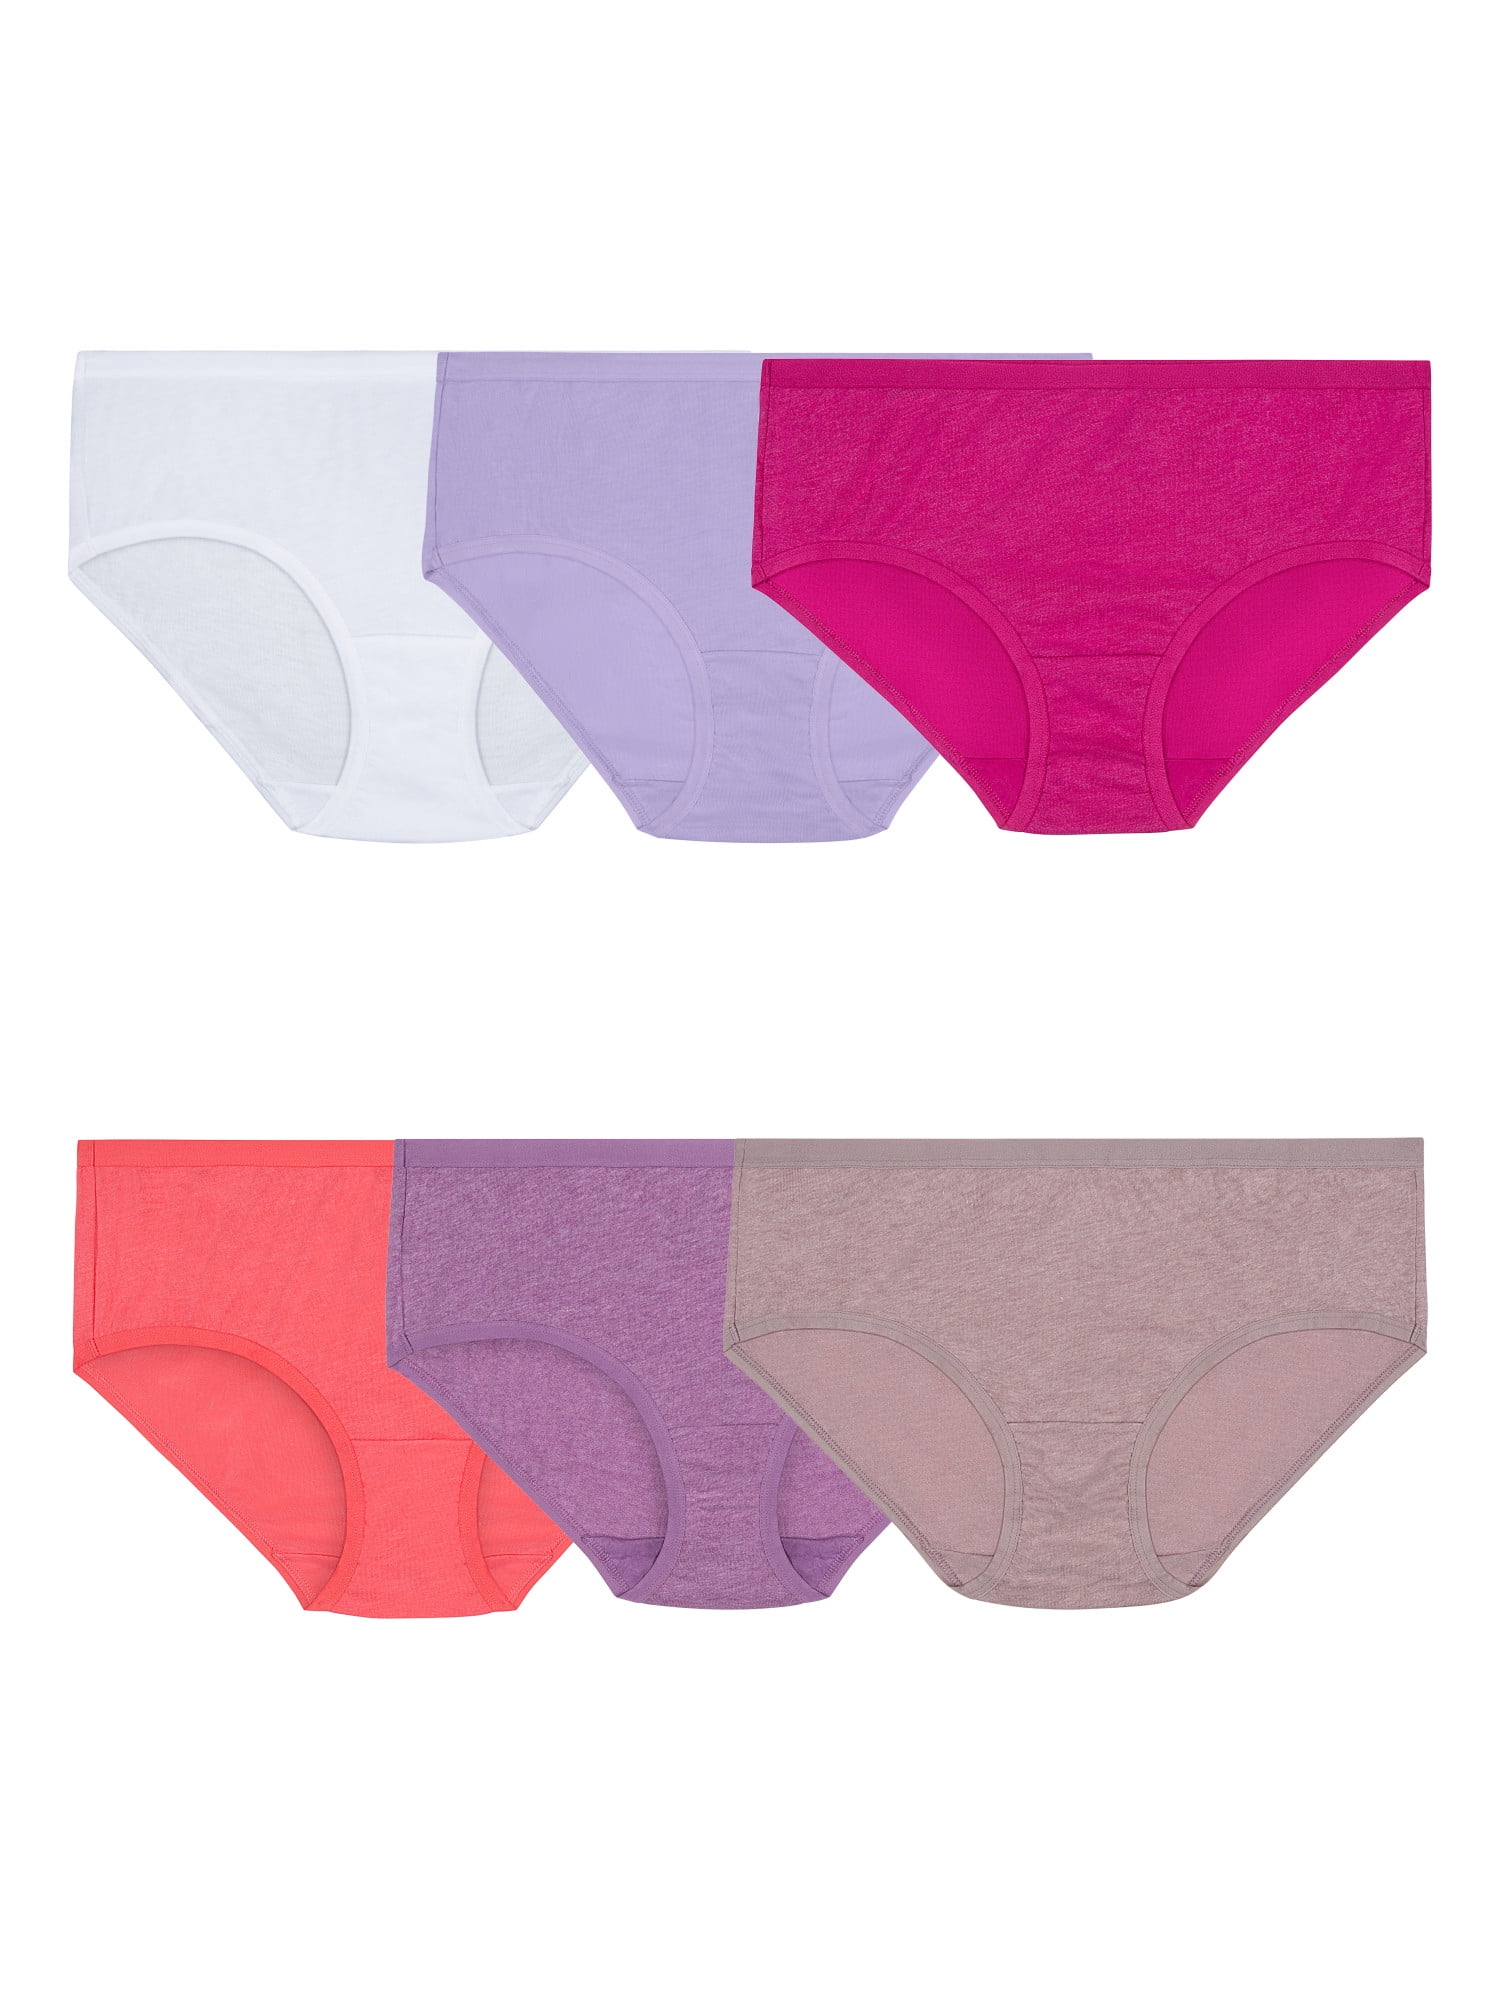 Fruit of the Loom Women's Premium Ultra Soft Hipster Panty, 6 Pack